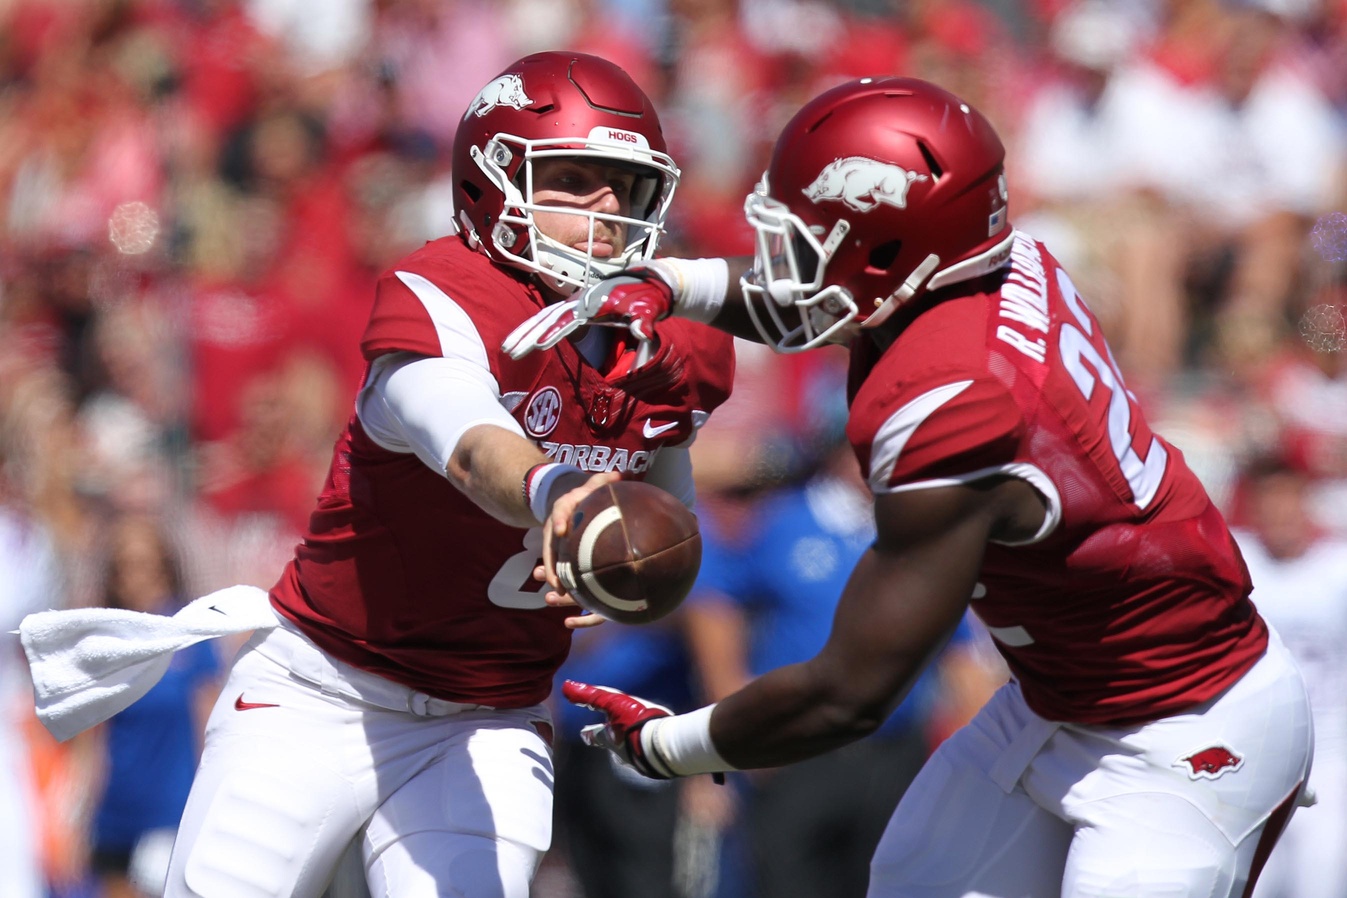 Sep 3, 2016; Fayetteville, AR, USA; Arkansas Razorbacks quarter back Austin Allen (8) hands the ball off to running back Rawleigh Williams III (22) during the first half against the Louisiana Tech Bulldogs at Donald W. Reynolds Razorback Stadium. Mandatory Credit: Nelson Chenault-USA TODAY Sports